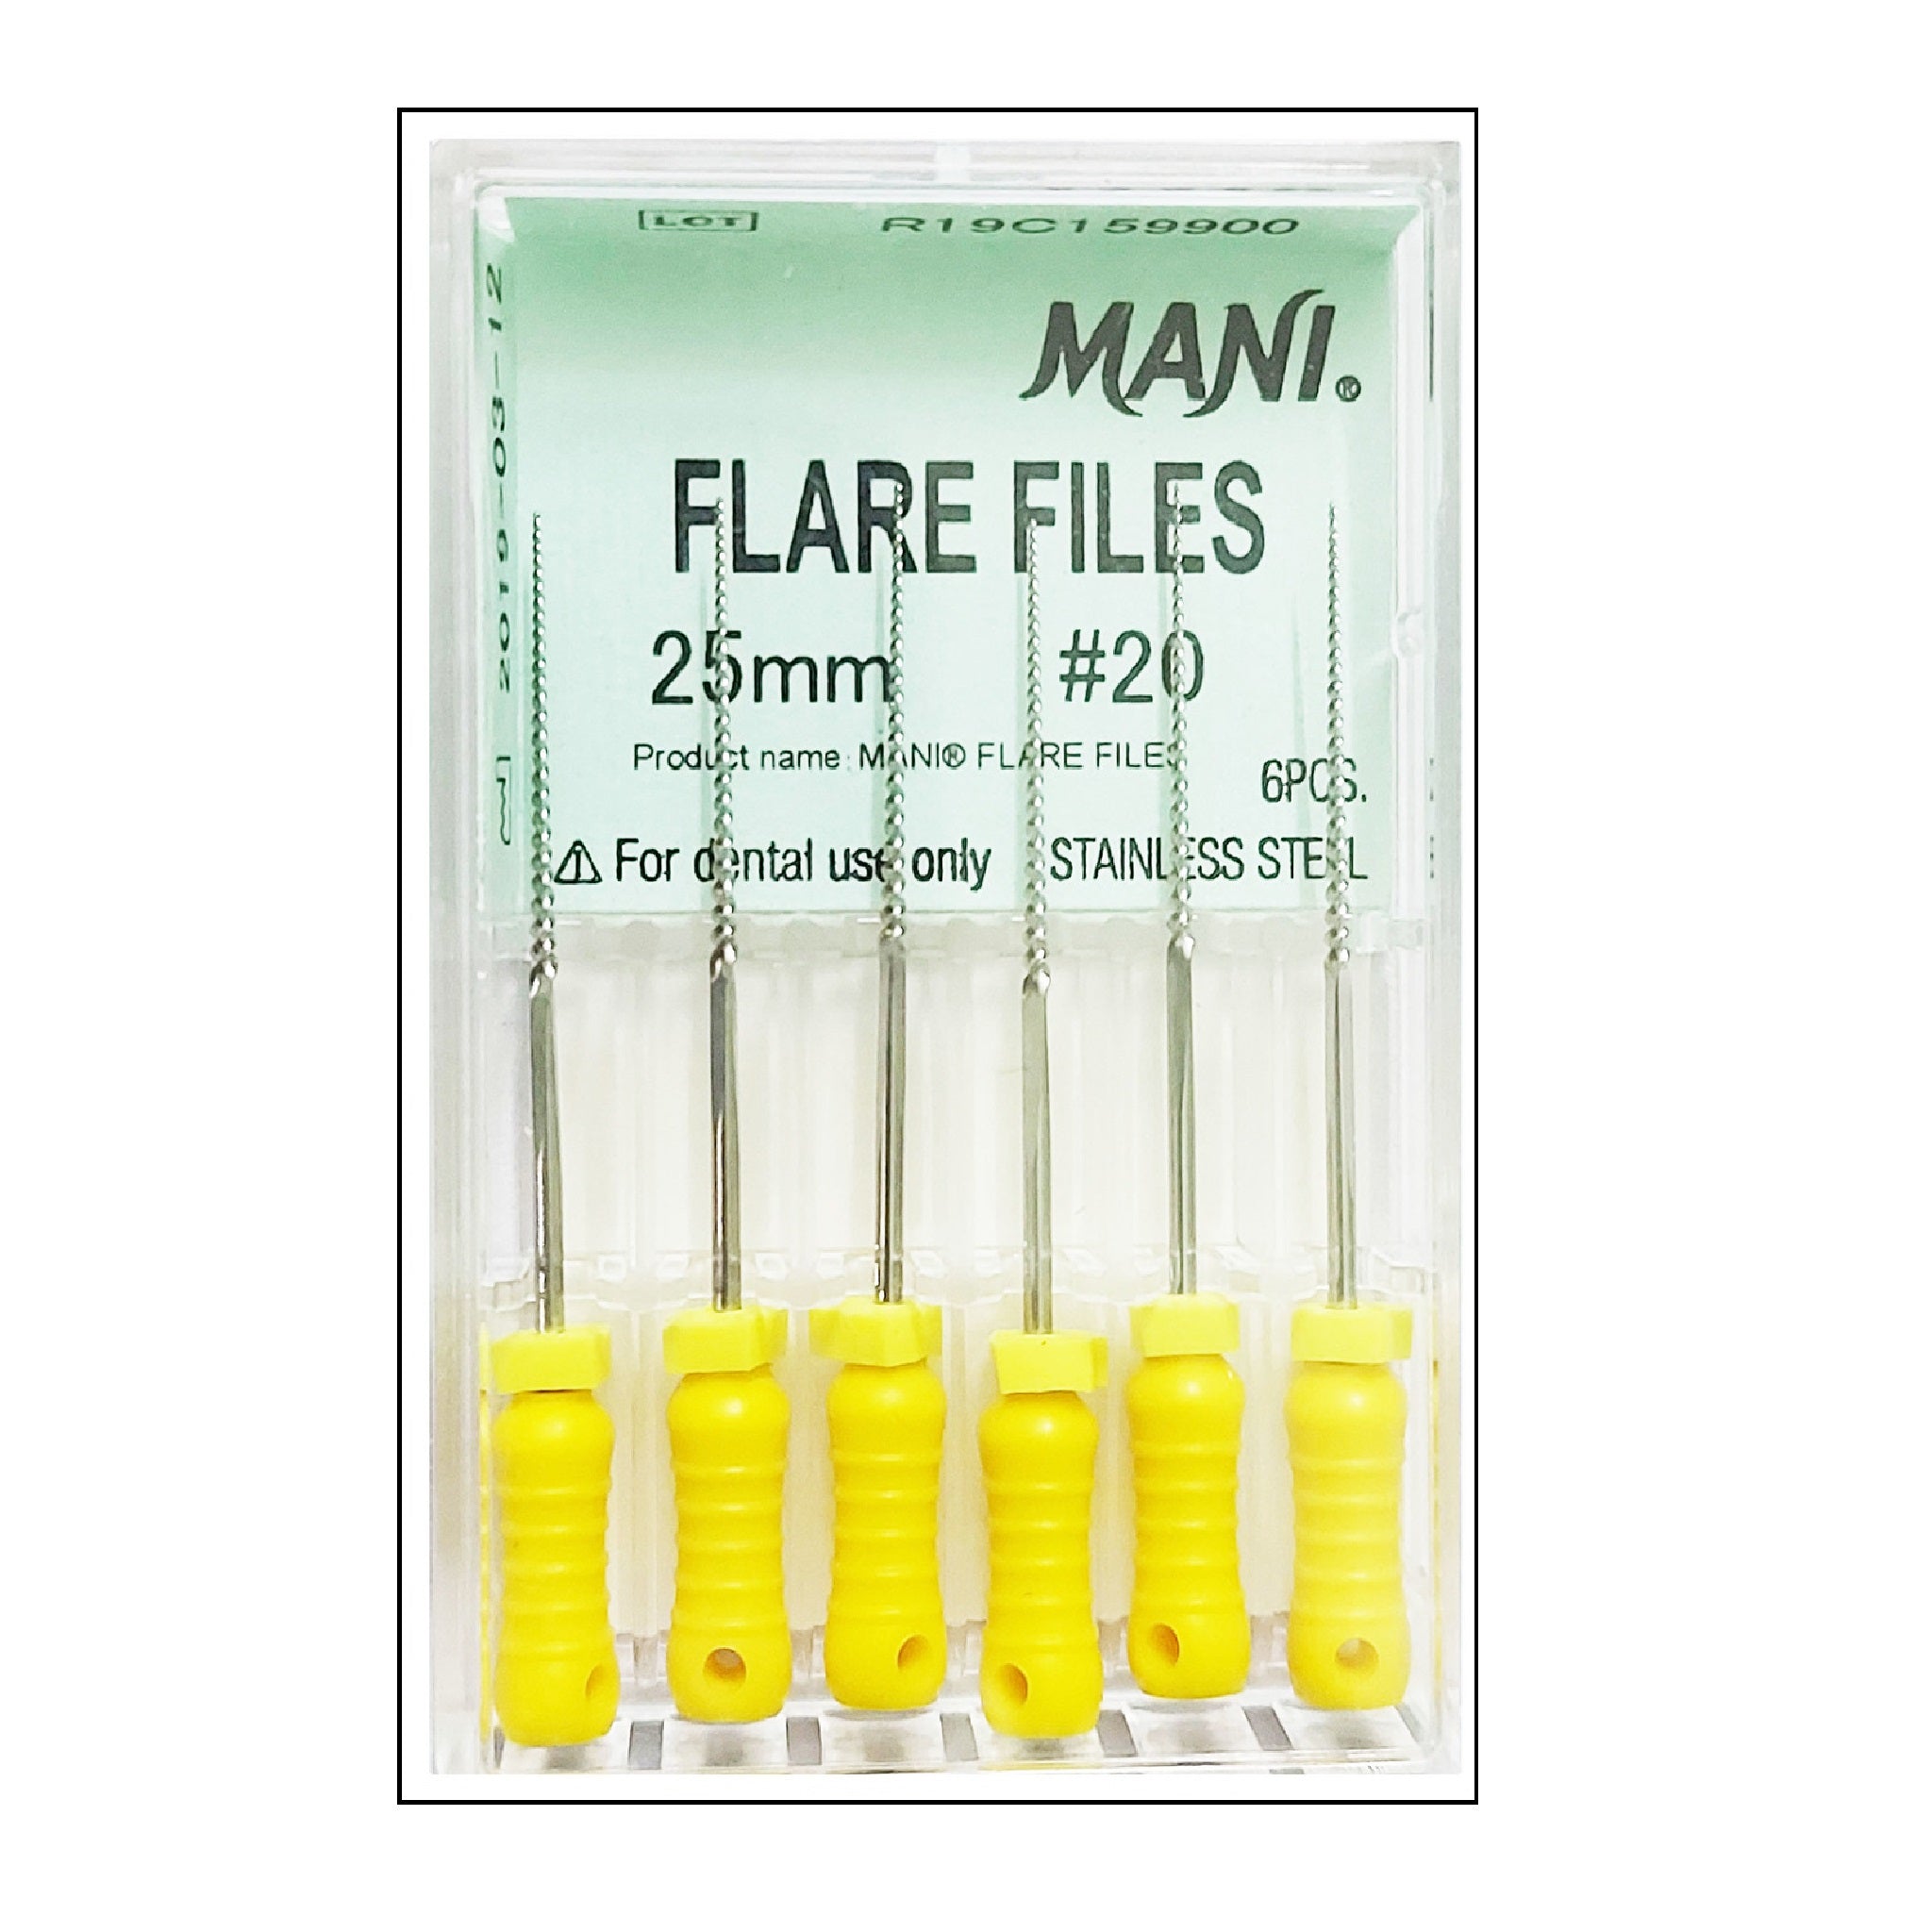 Mani Flare Files 25mm -(Pack of 6) Dental Root Canal Endodontic Files